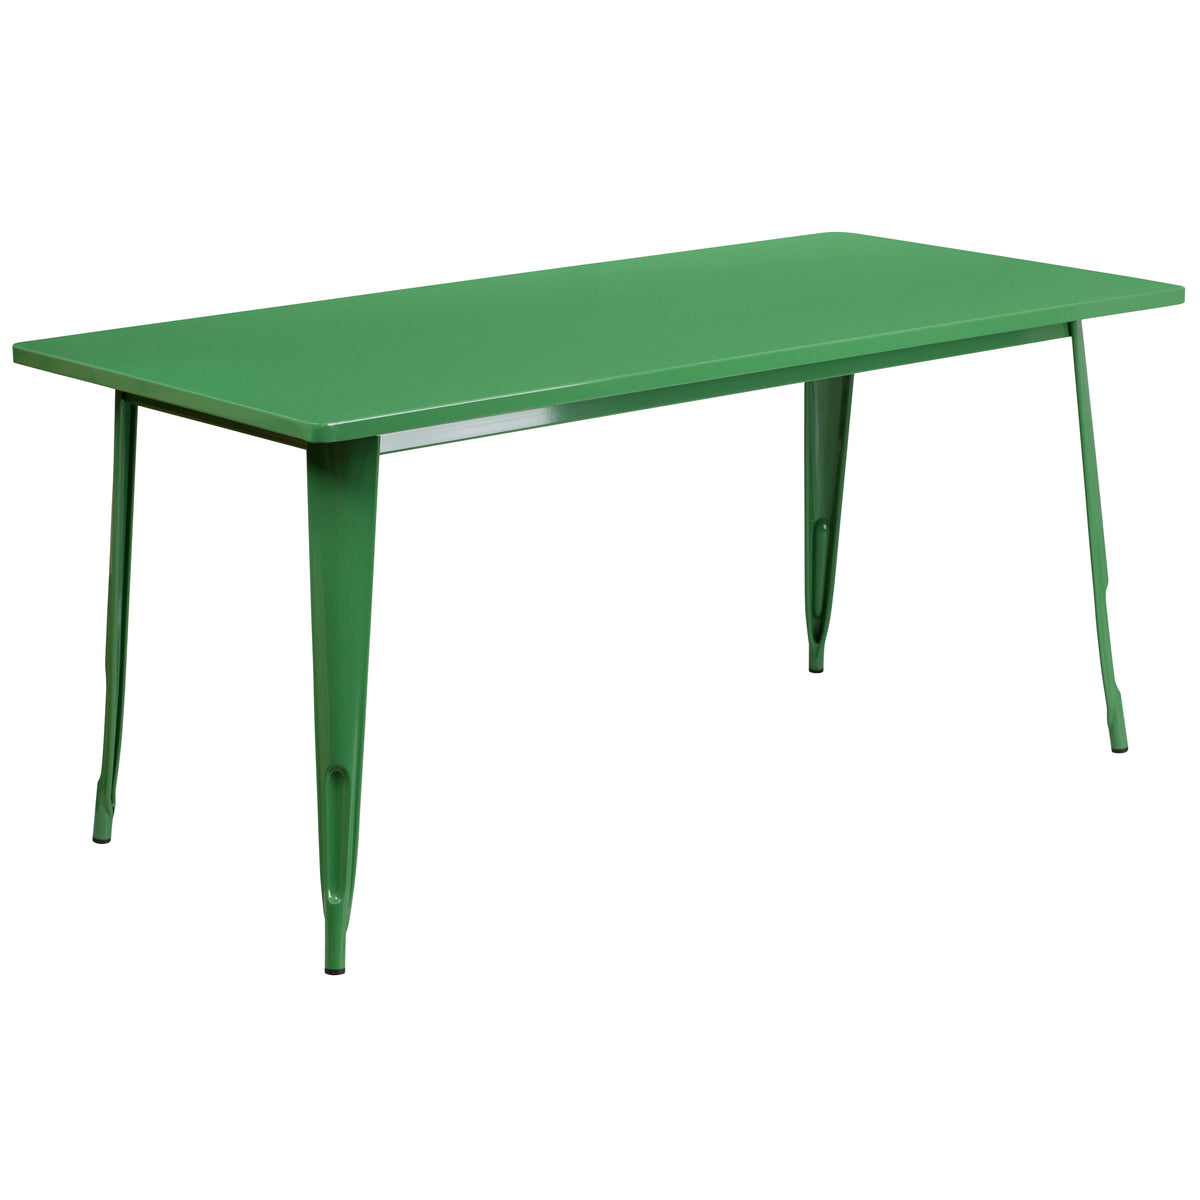 Green |#| 31.5inch x 63inch Rectangular Green Metal Indoor-Outdoor Table Set with 6 Arm Chairs